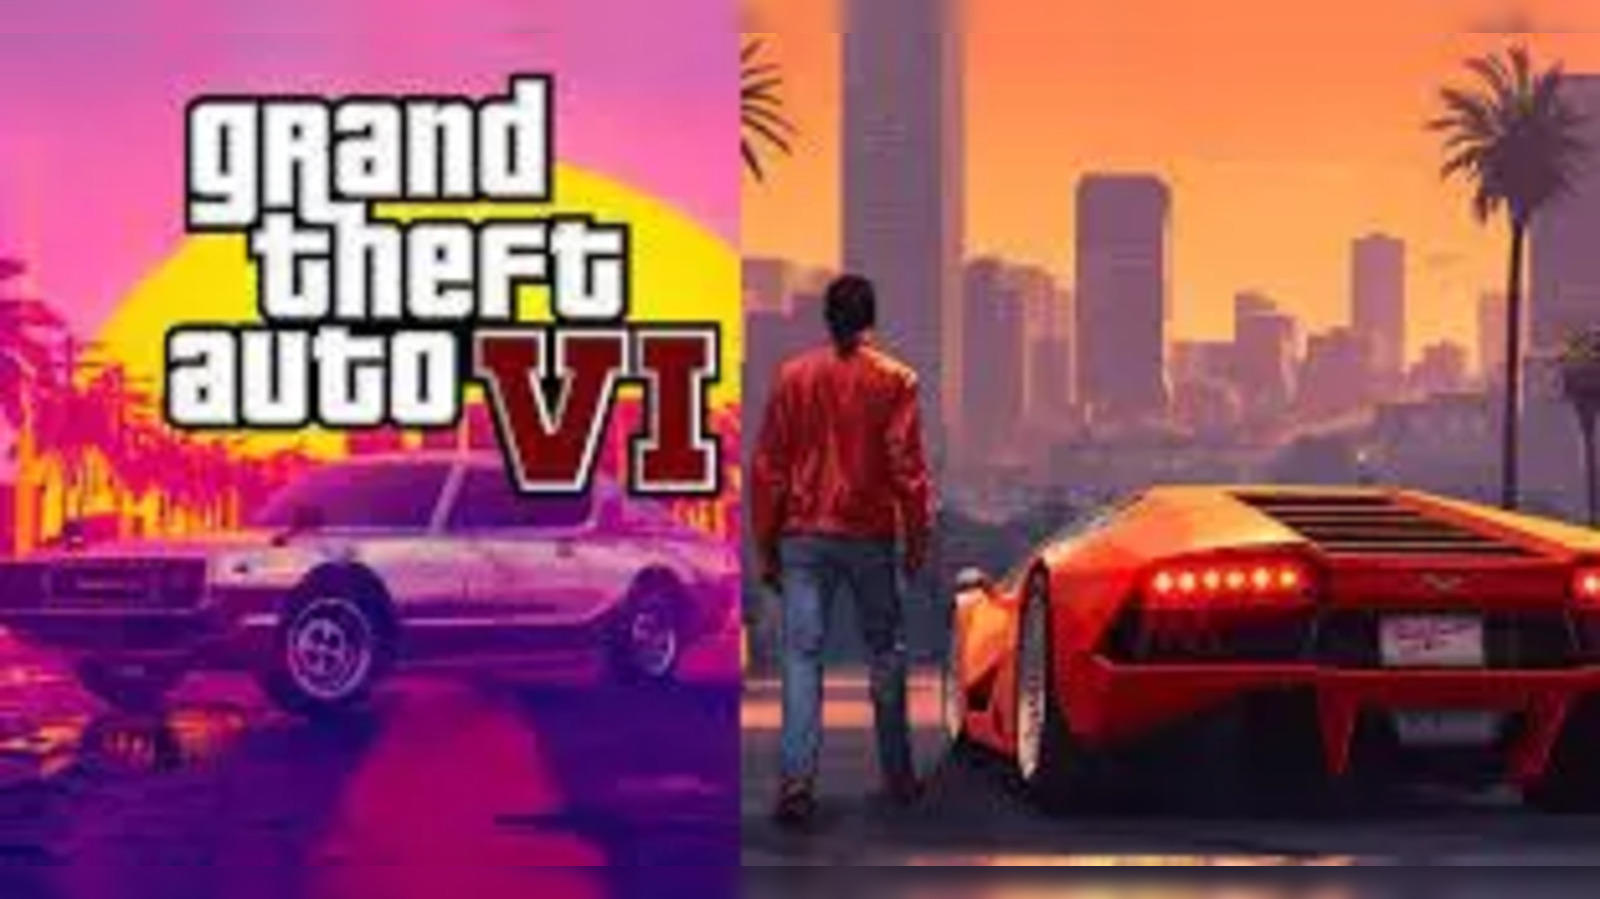 When is the GTA 6 Trailer Coming Out?